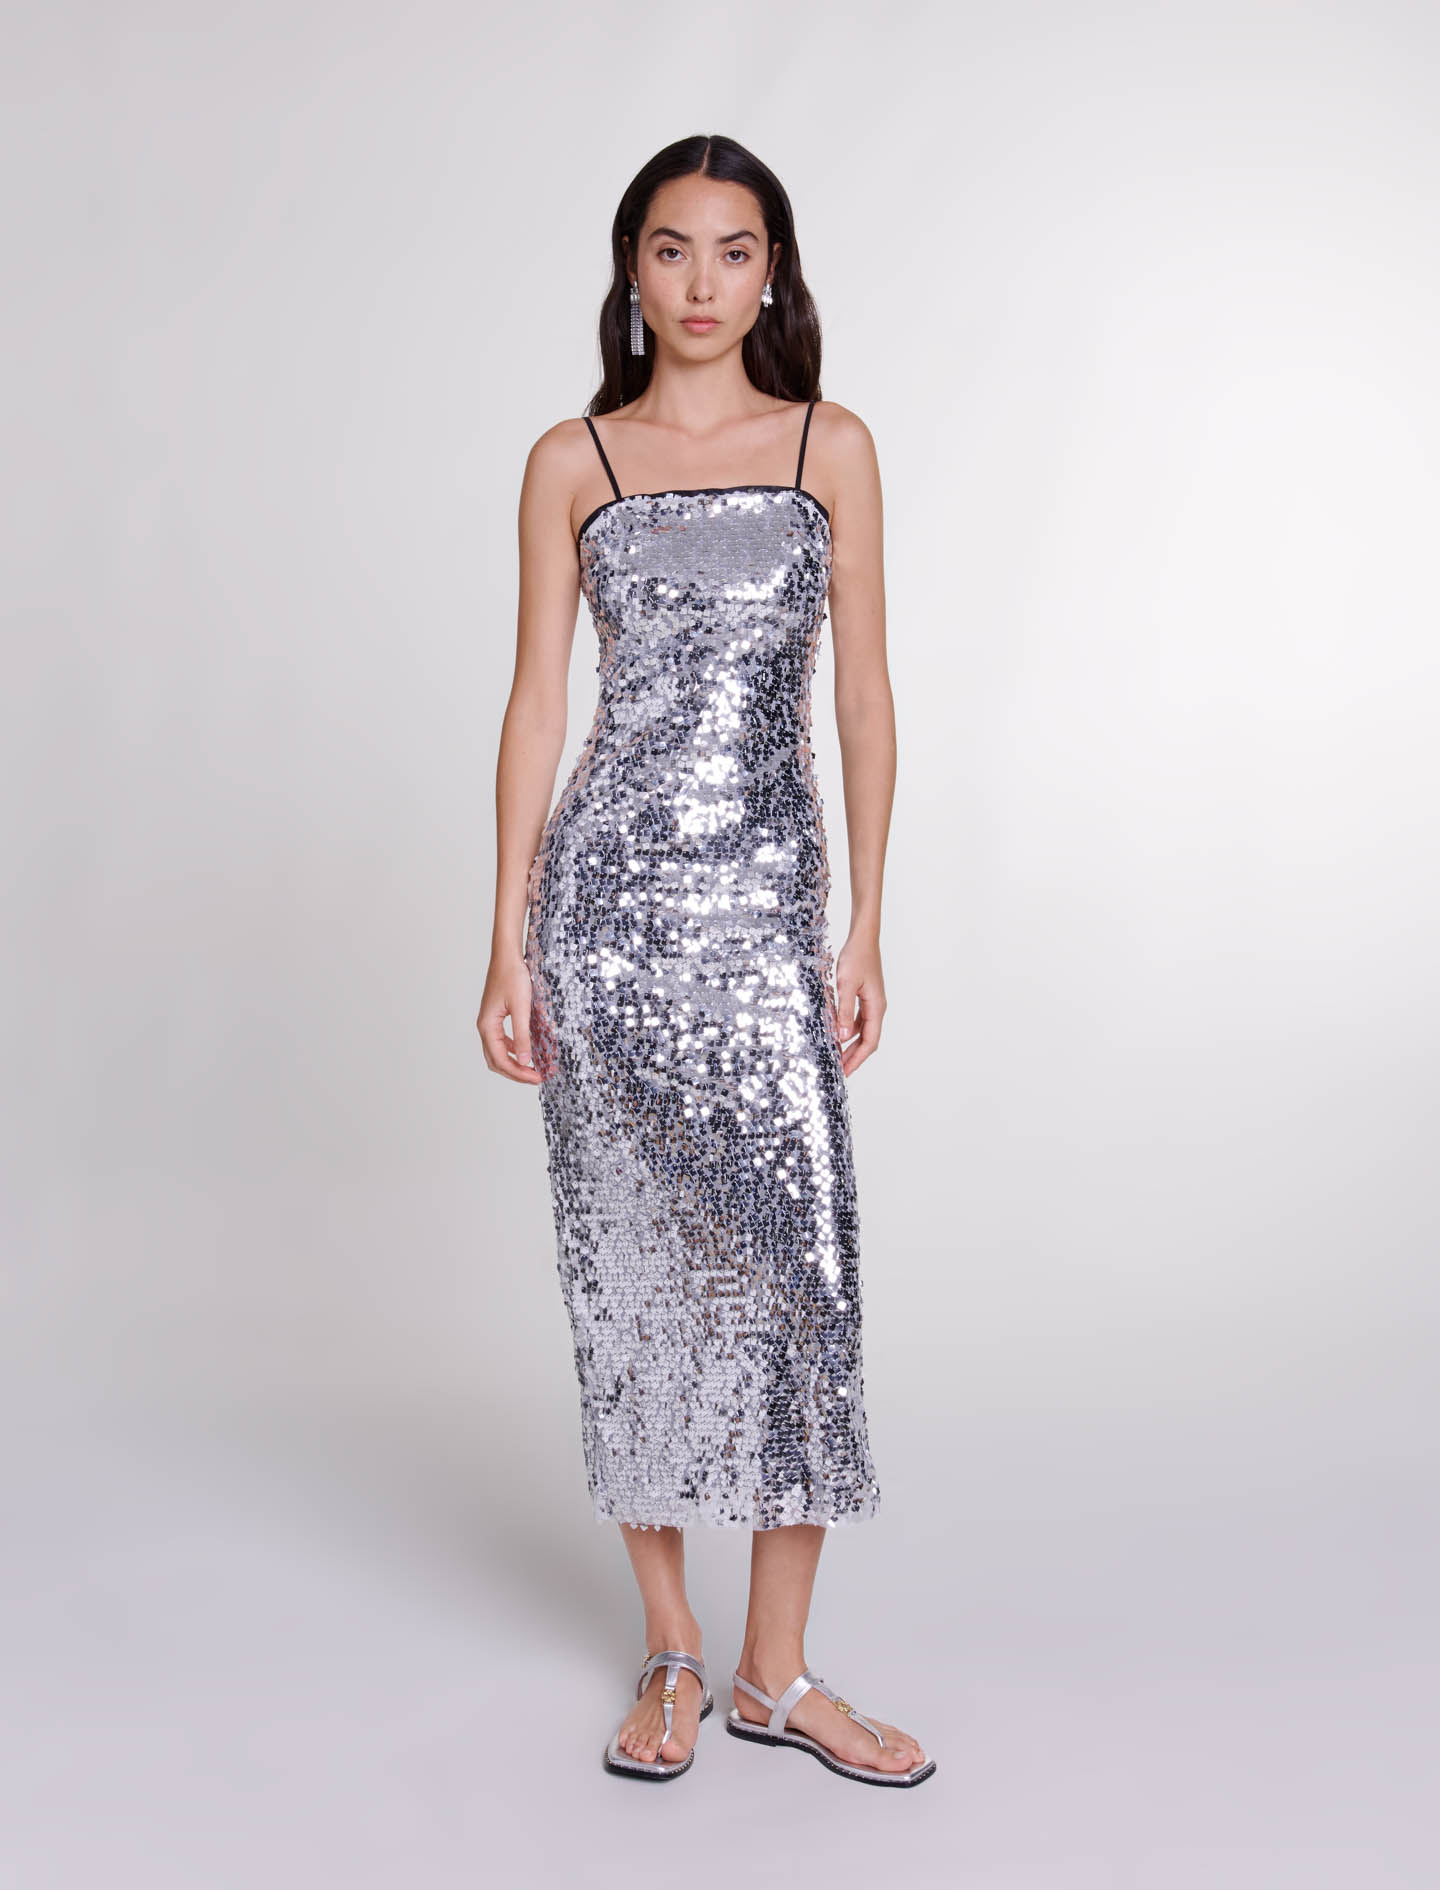 Maje Woman's polyester Lining: Sequin maxi dress for Spring/Summer, in color Silver / Grey